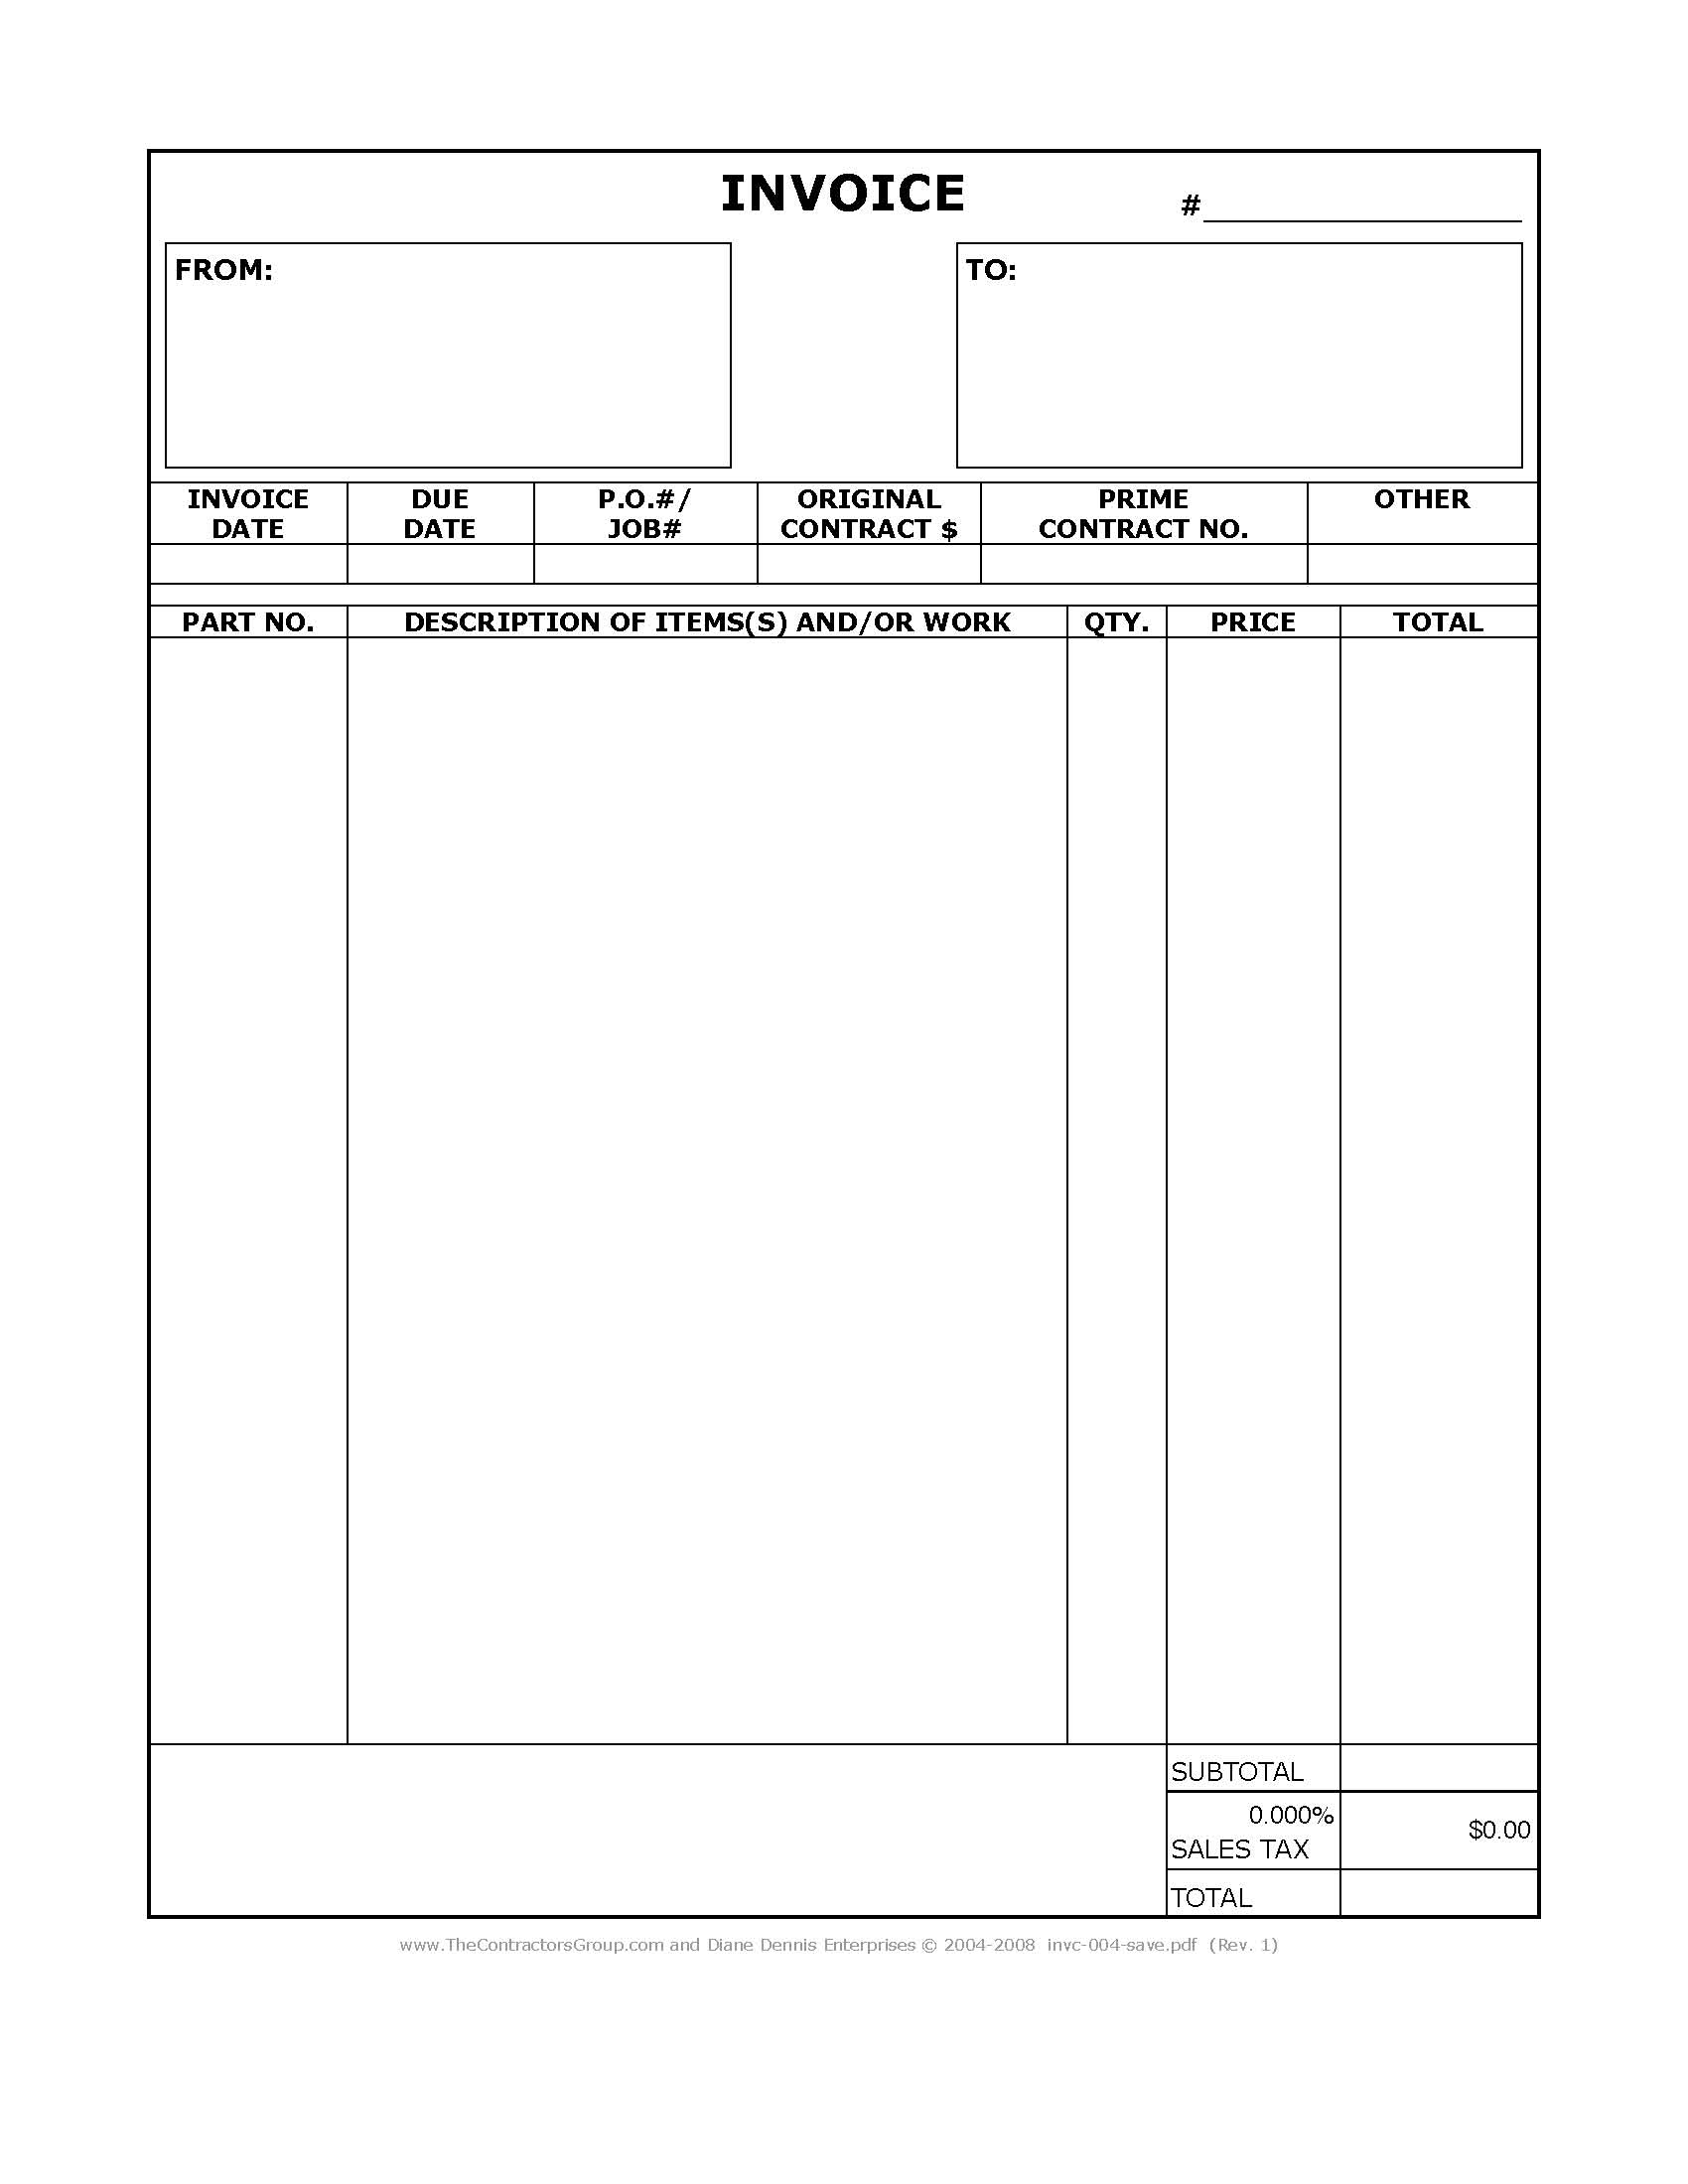 Image of a construction invoice form